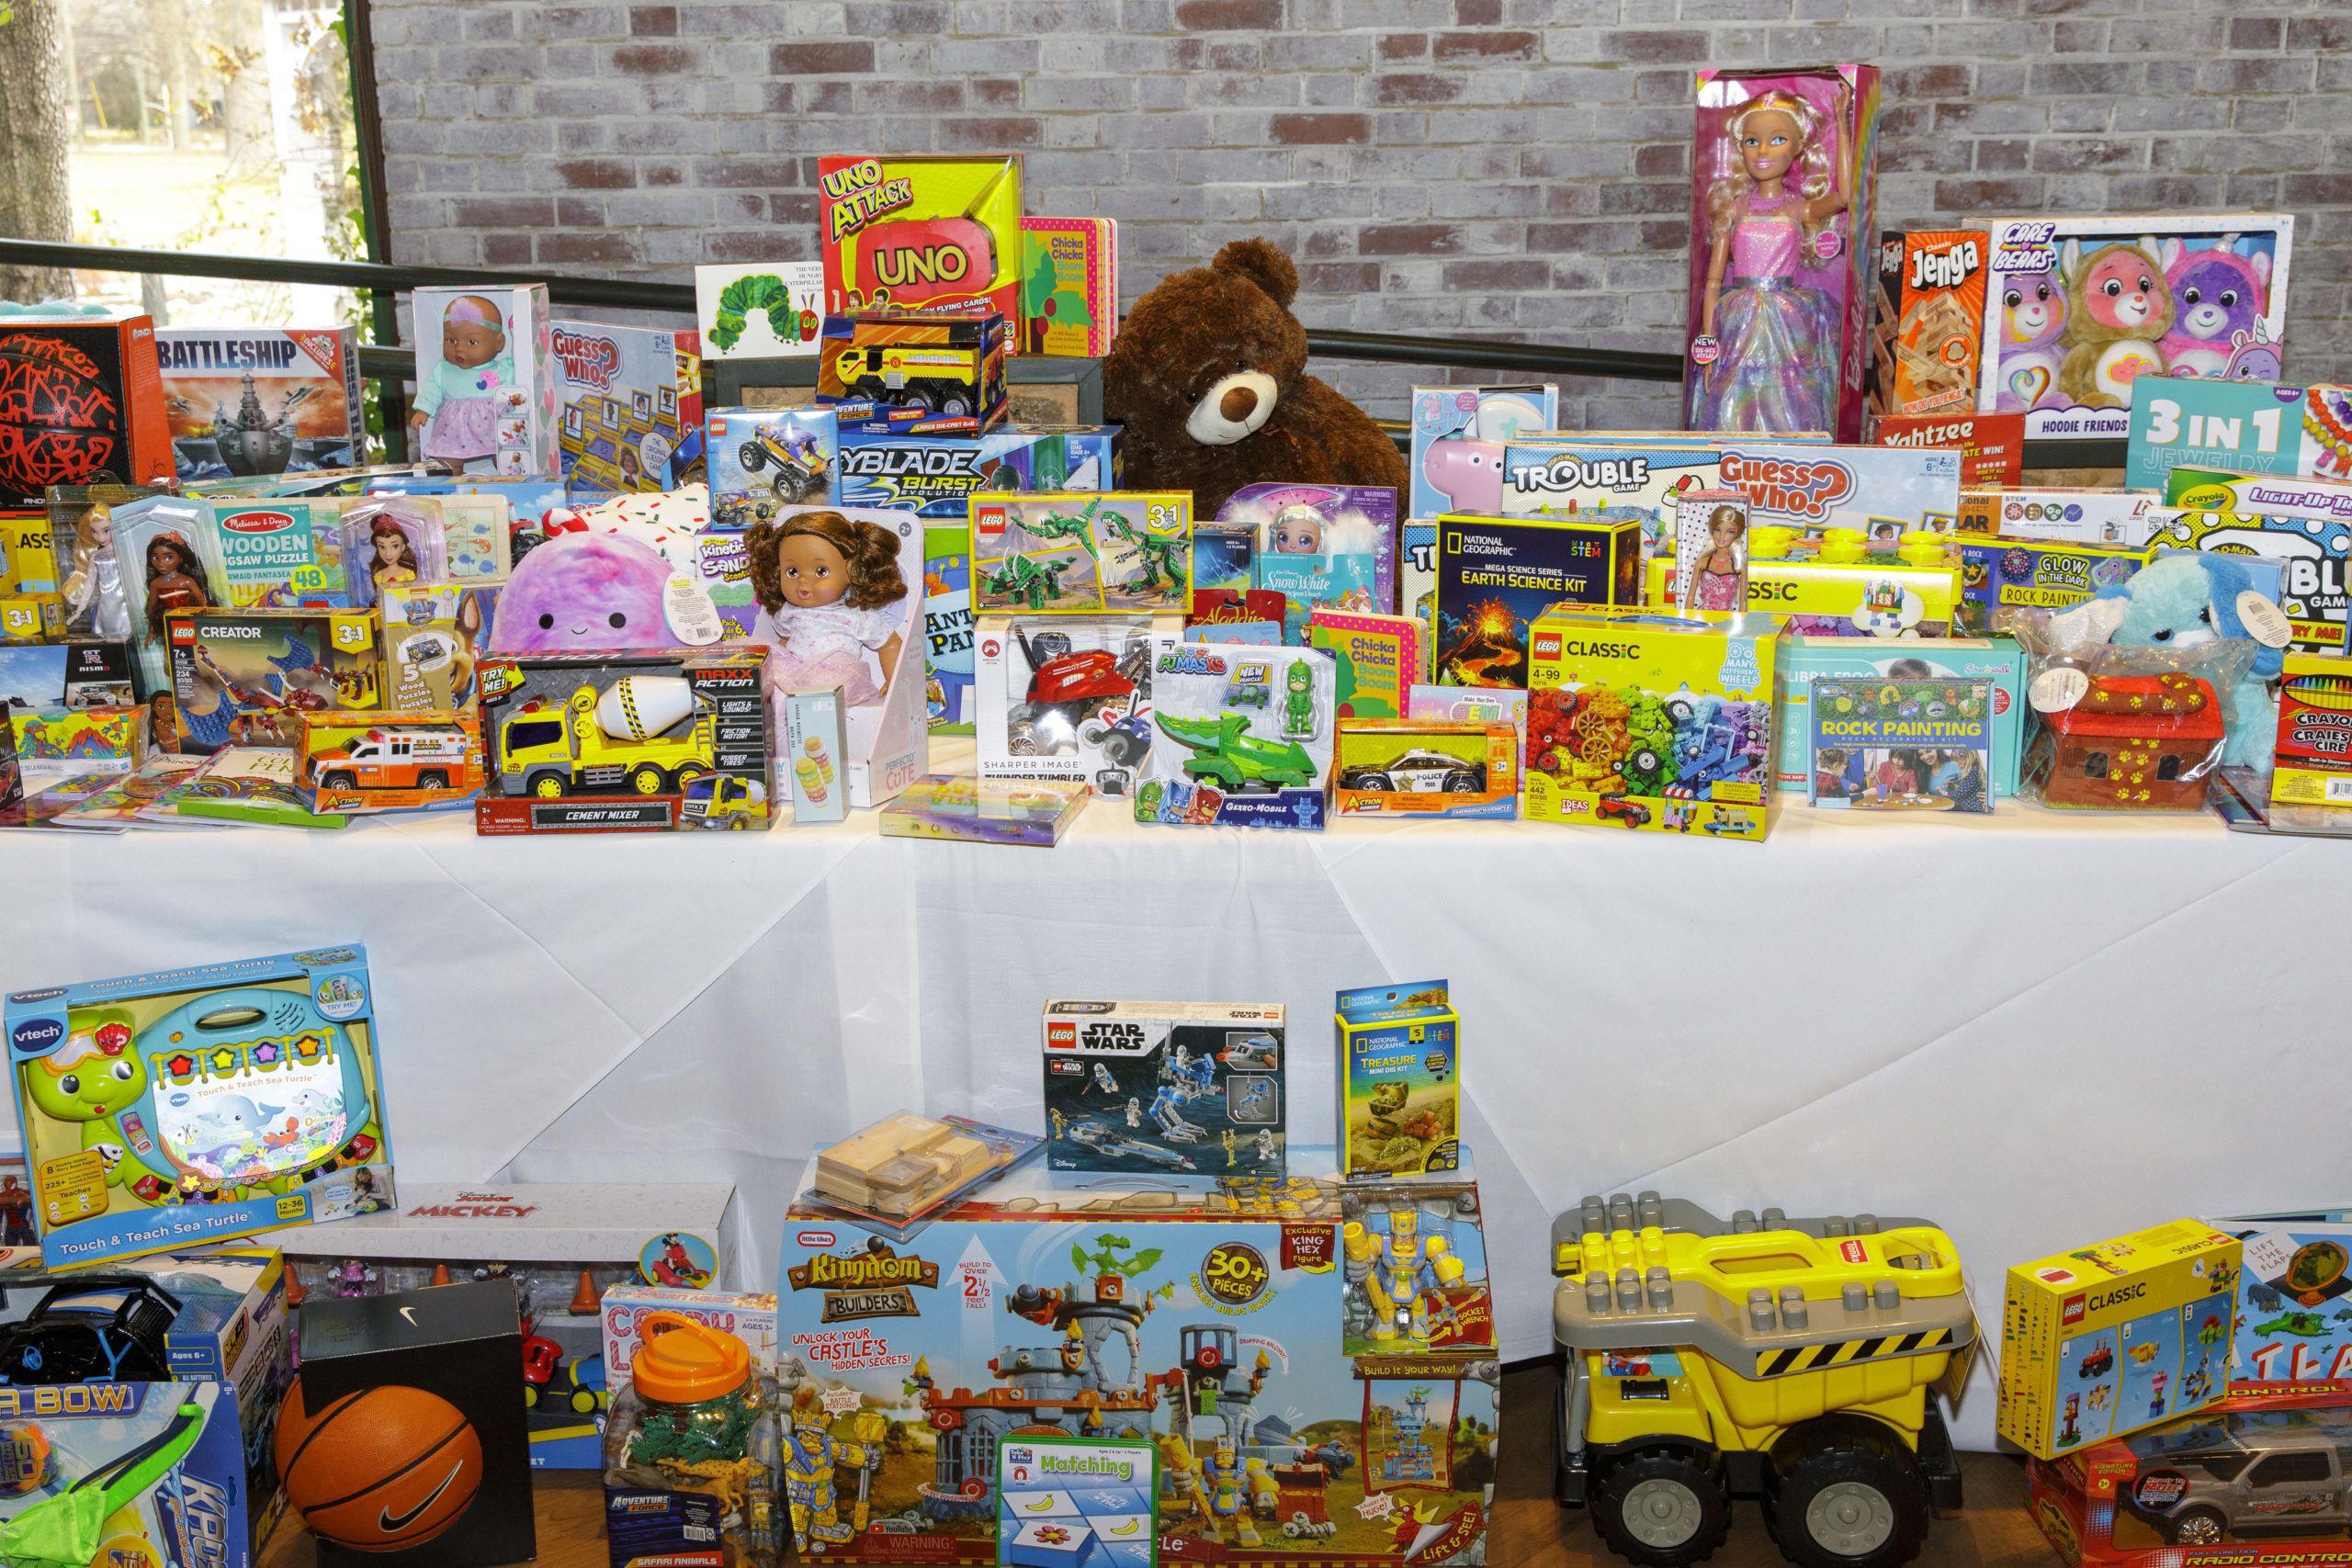 Investment specialist group donates over 100 toys, gifts to Salvation Army in West Hartford